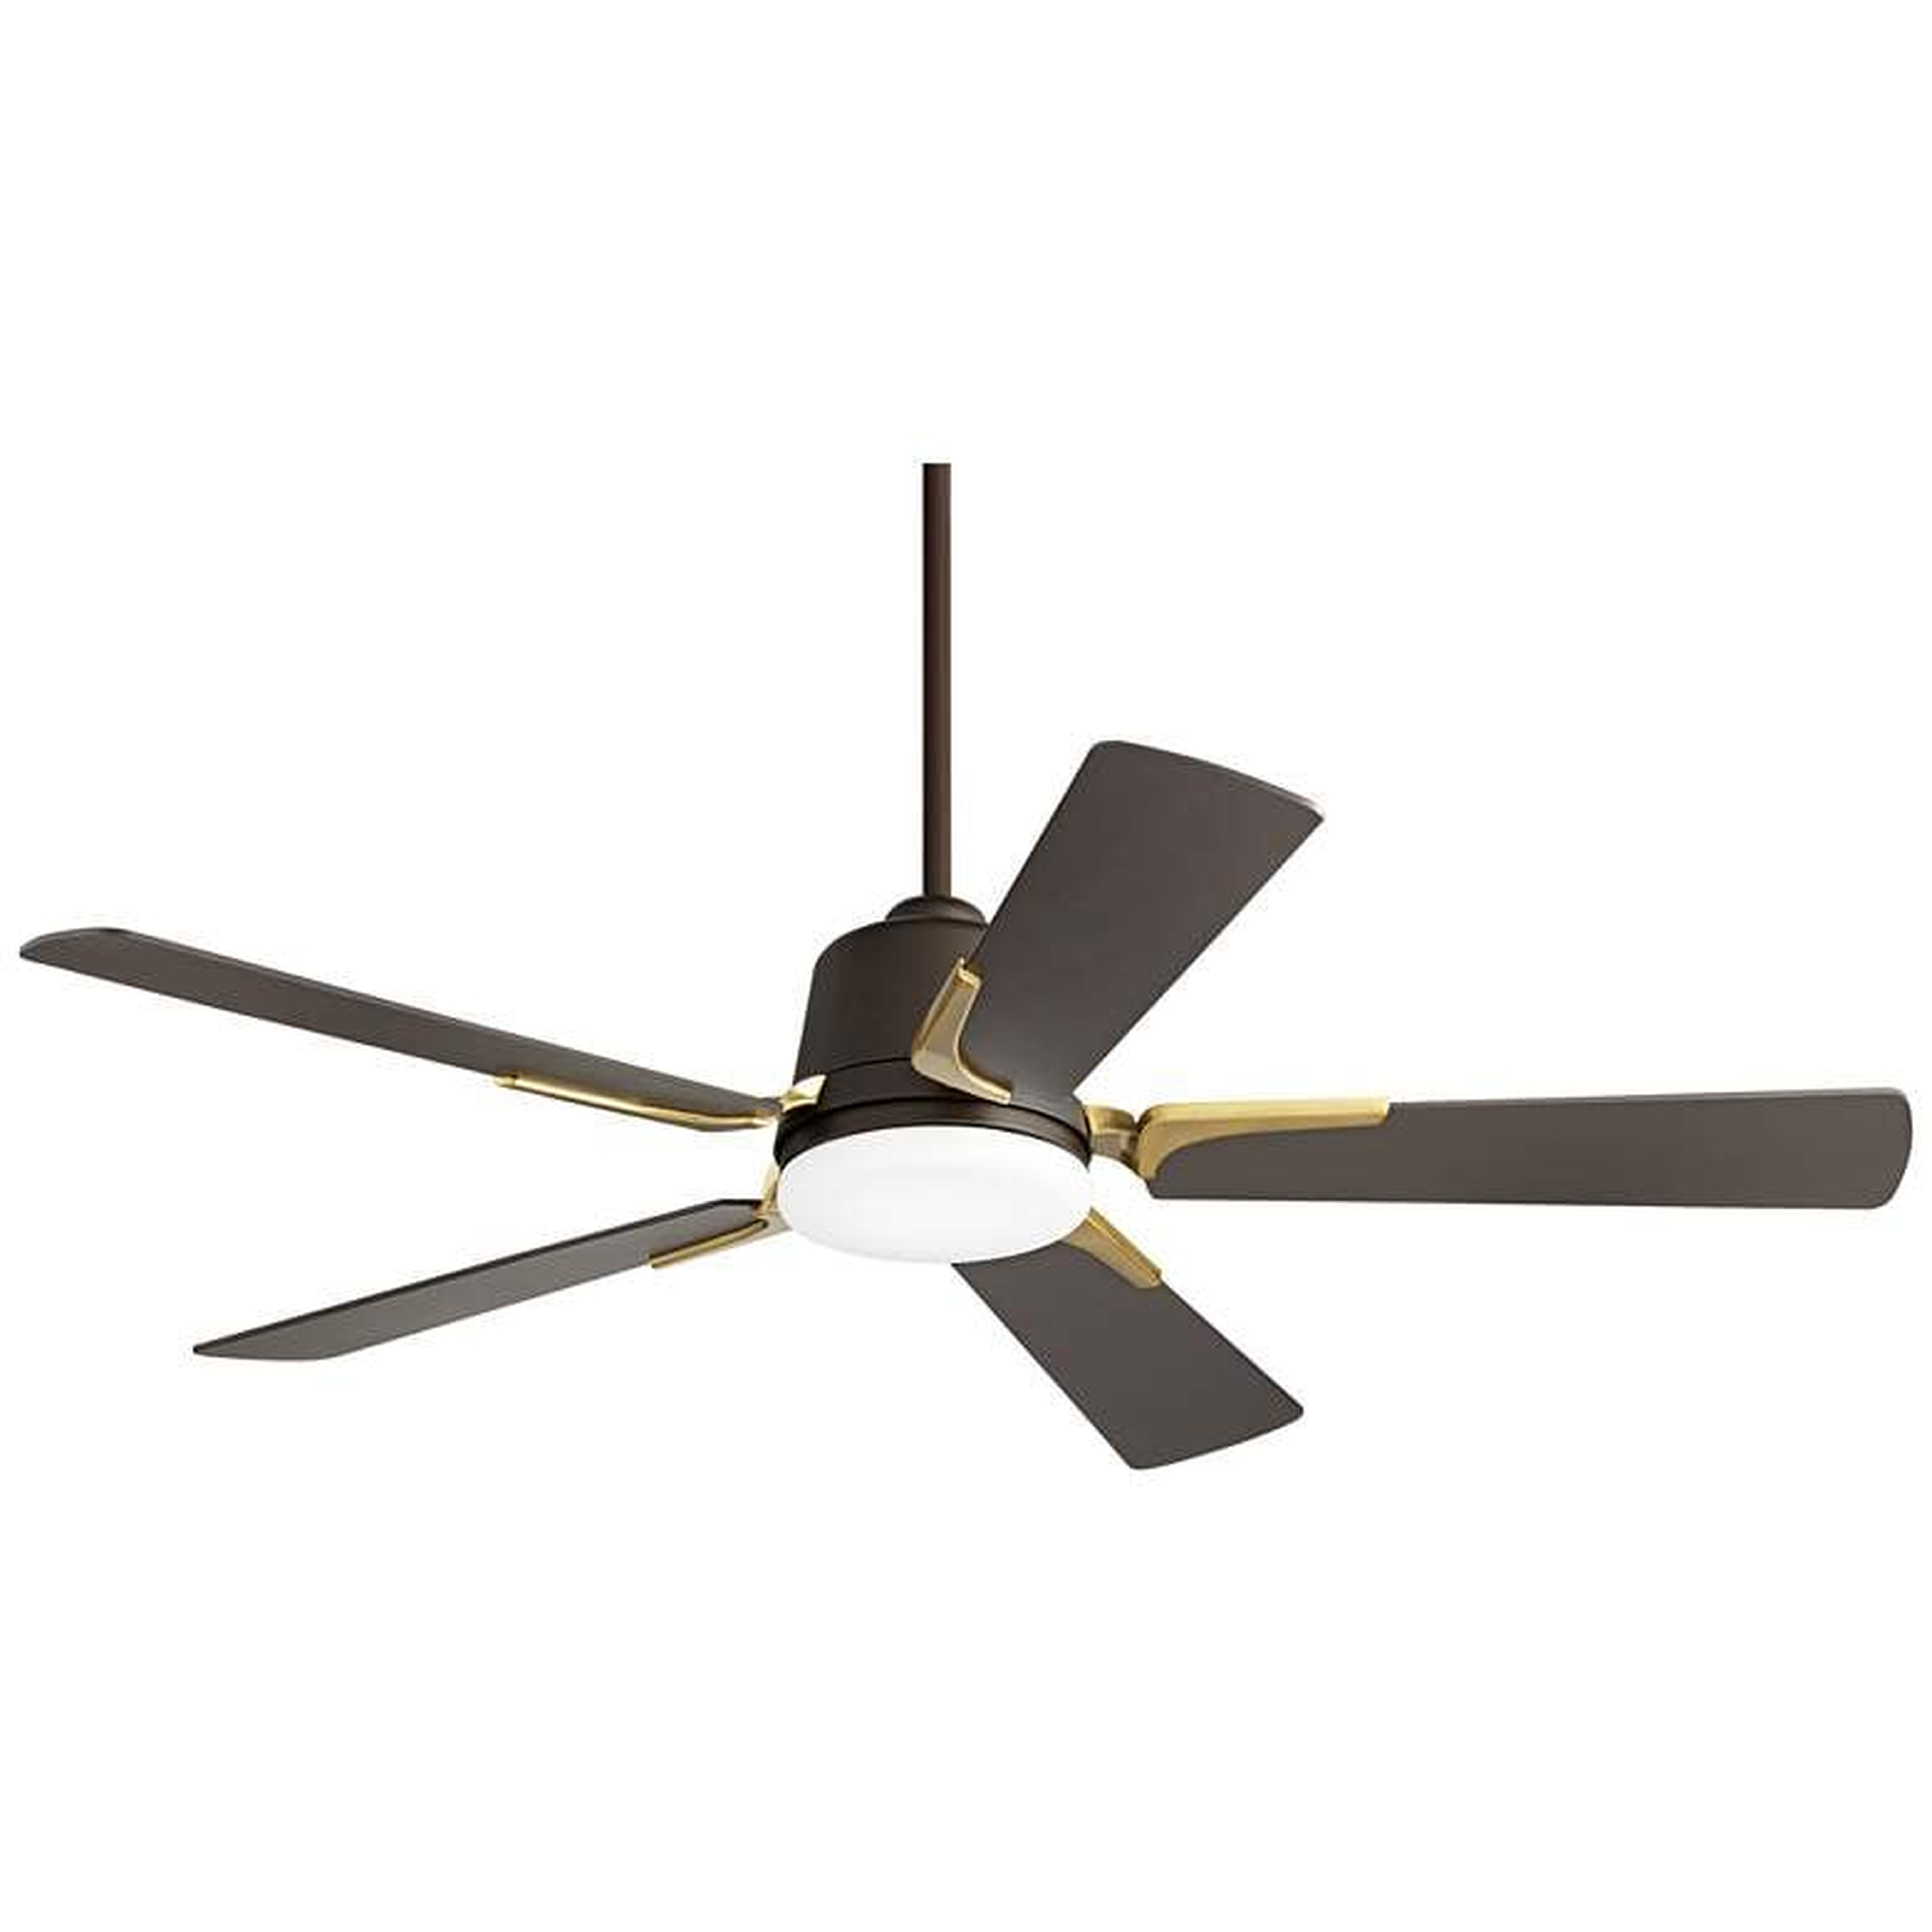 54" Casa Vieja Desteny Bronze and Soft Brass LED Ceiling Fan - Style # 65A58 + 12" Downrod (10’ ceiling height**) - Lamps Plus